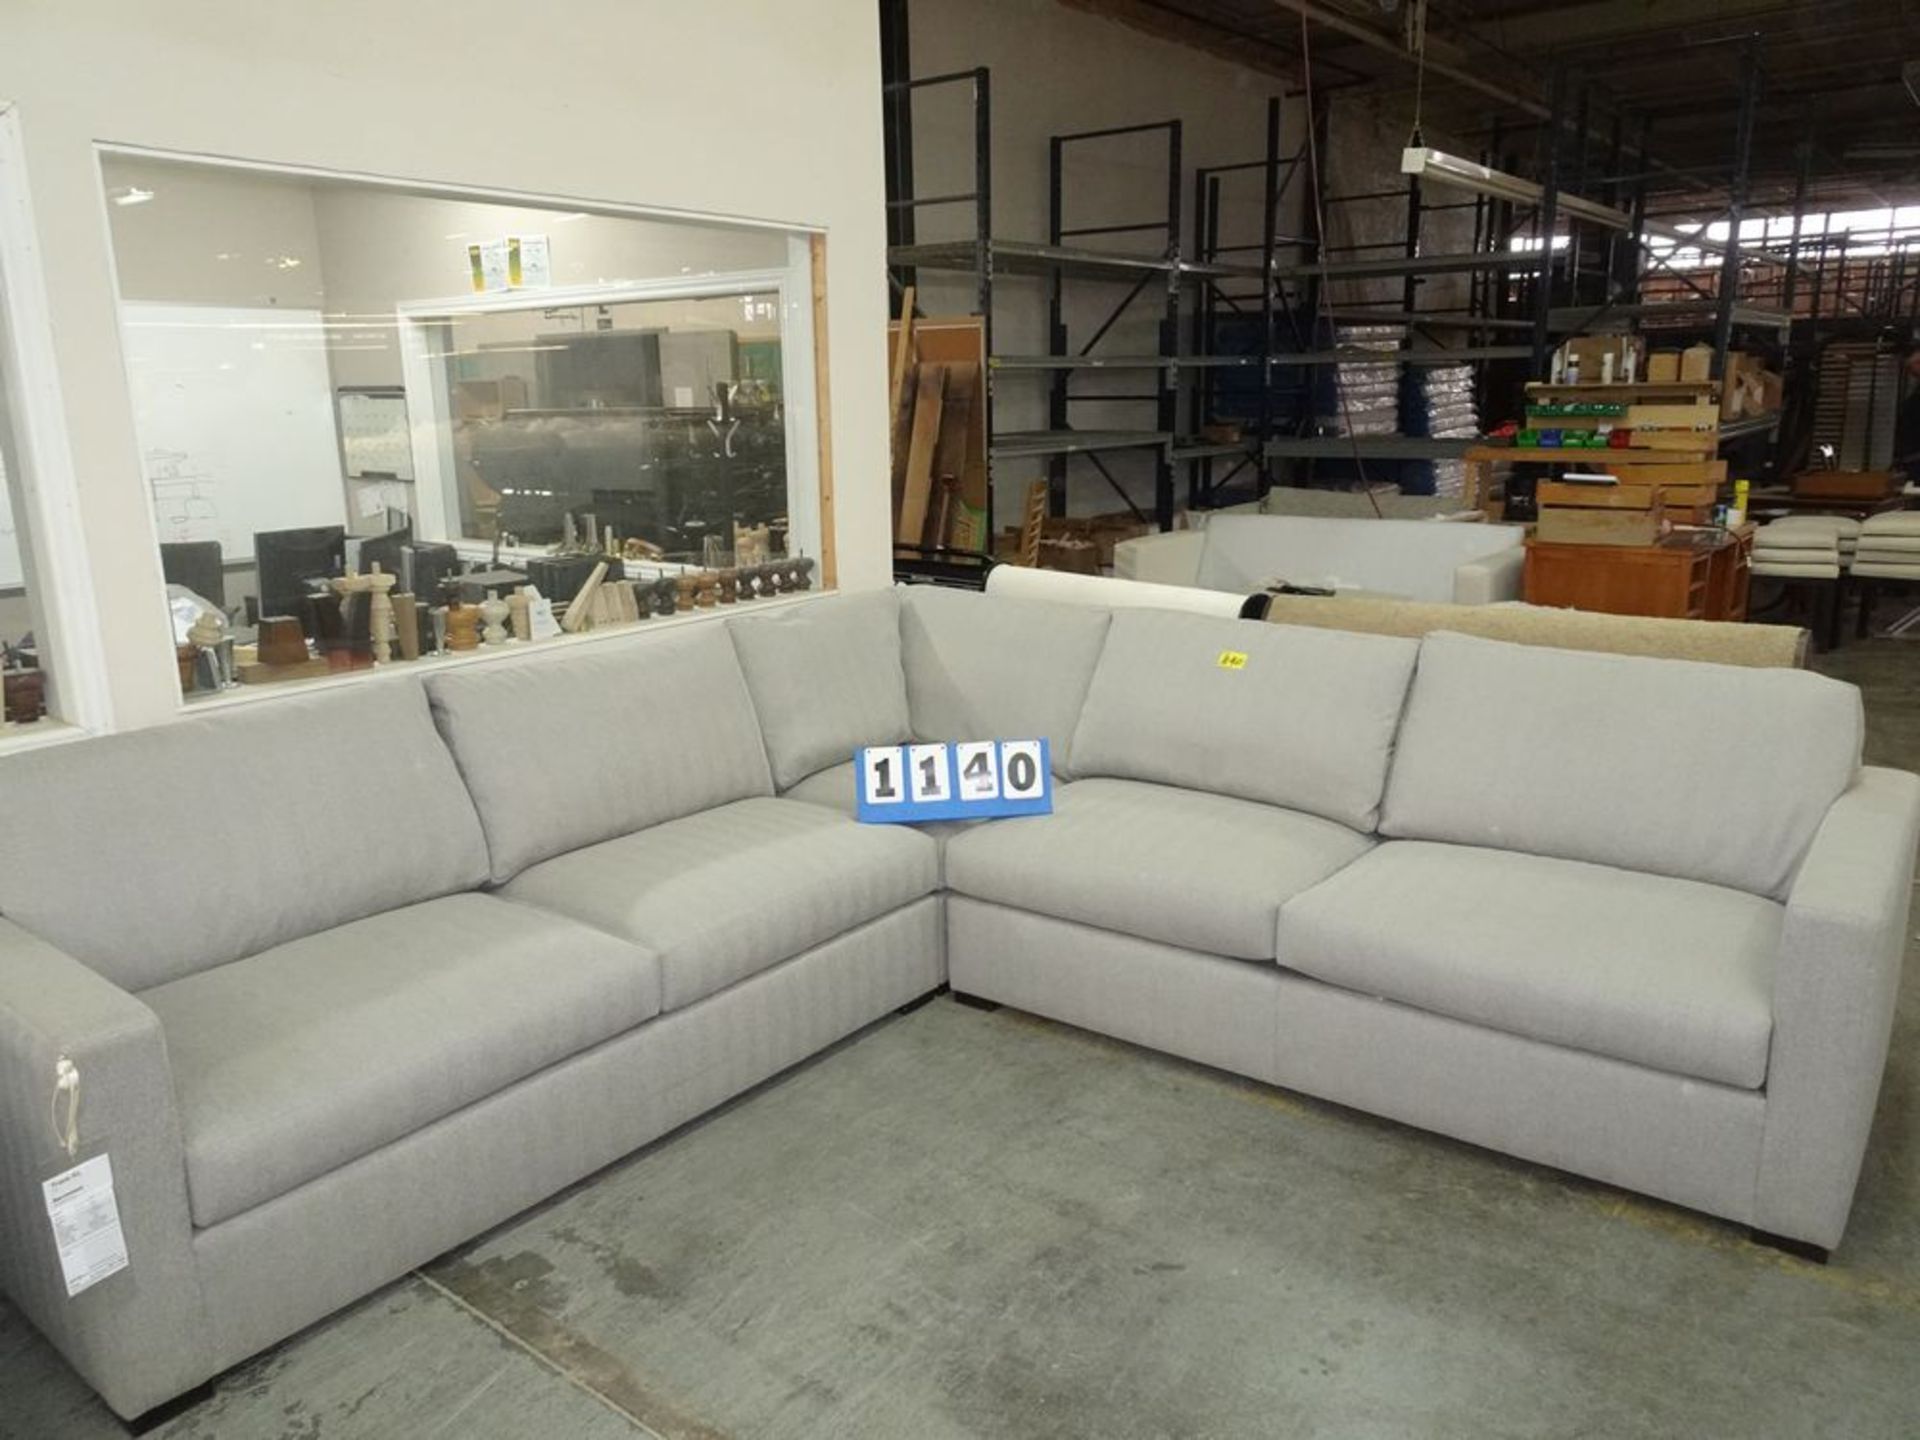 3 PIECE SECTIONAL SOFA - PALE GRAY